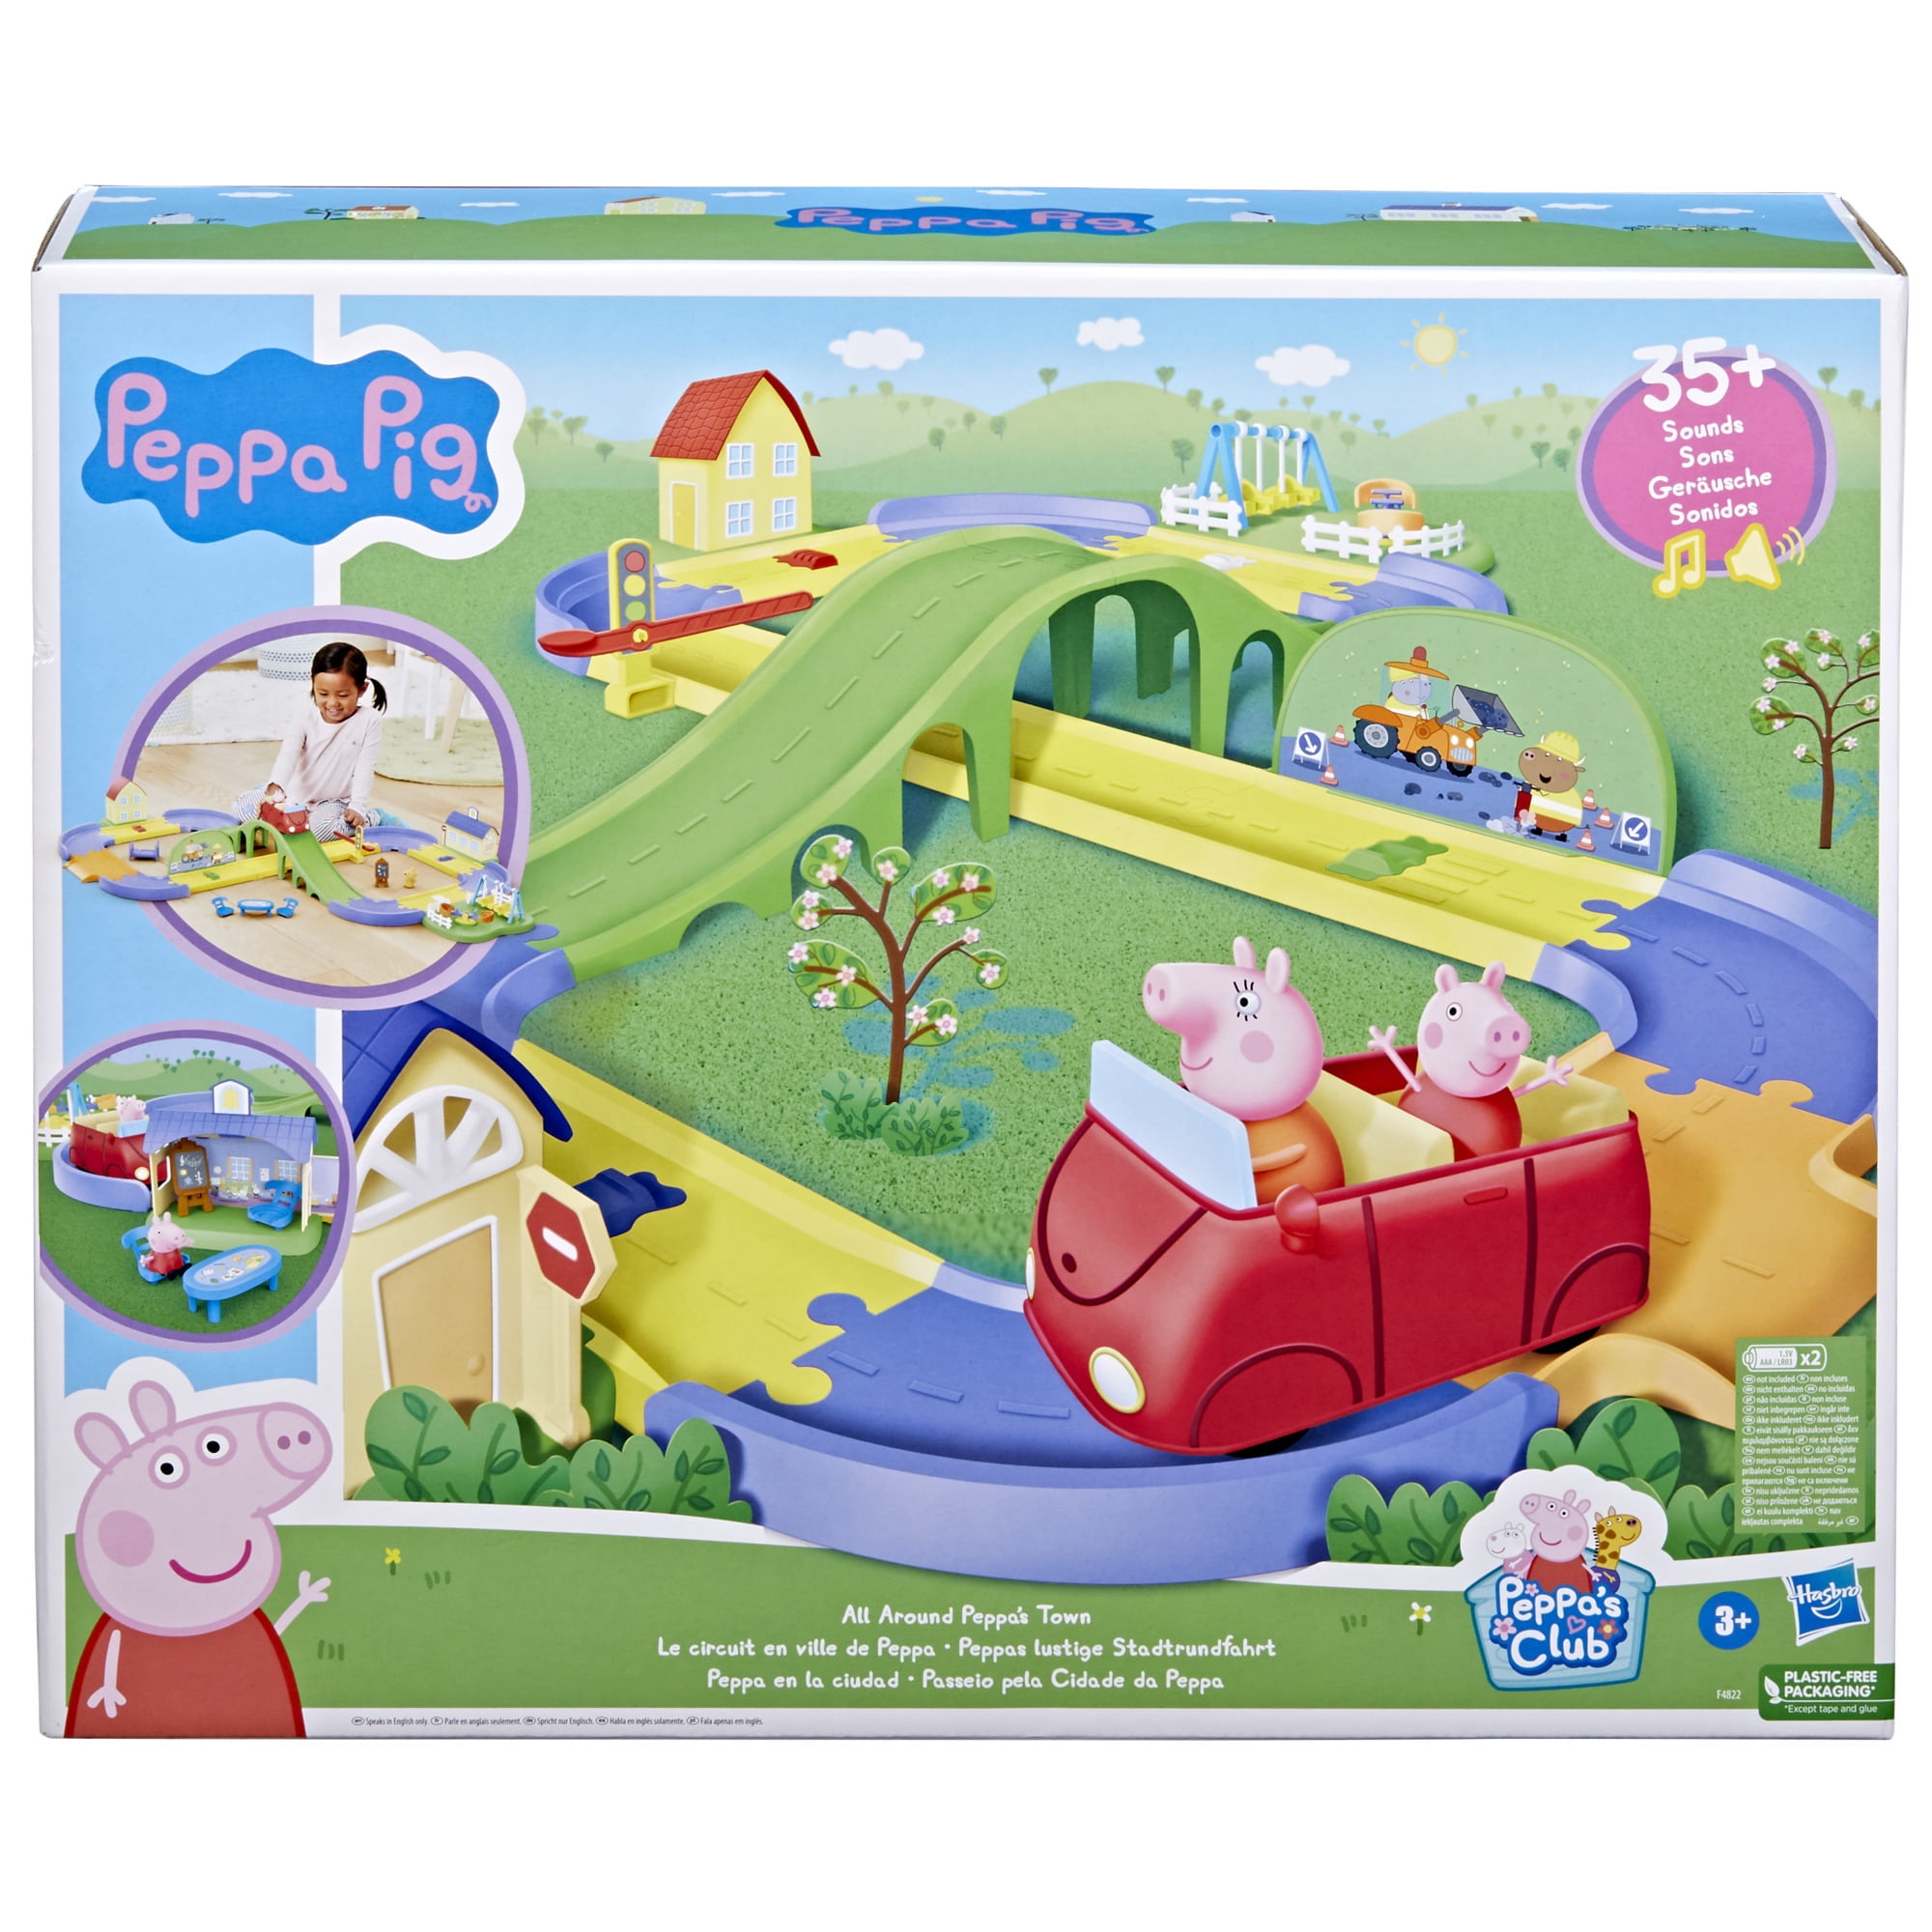 Peppa Pig All Around Peppa's Town Playset Pig Toys, Removable Doll Figure